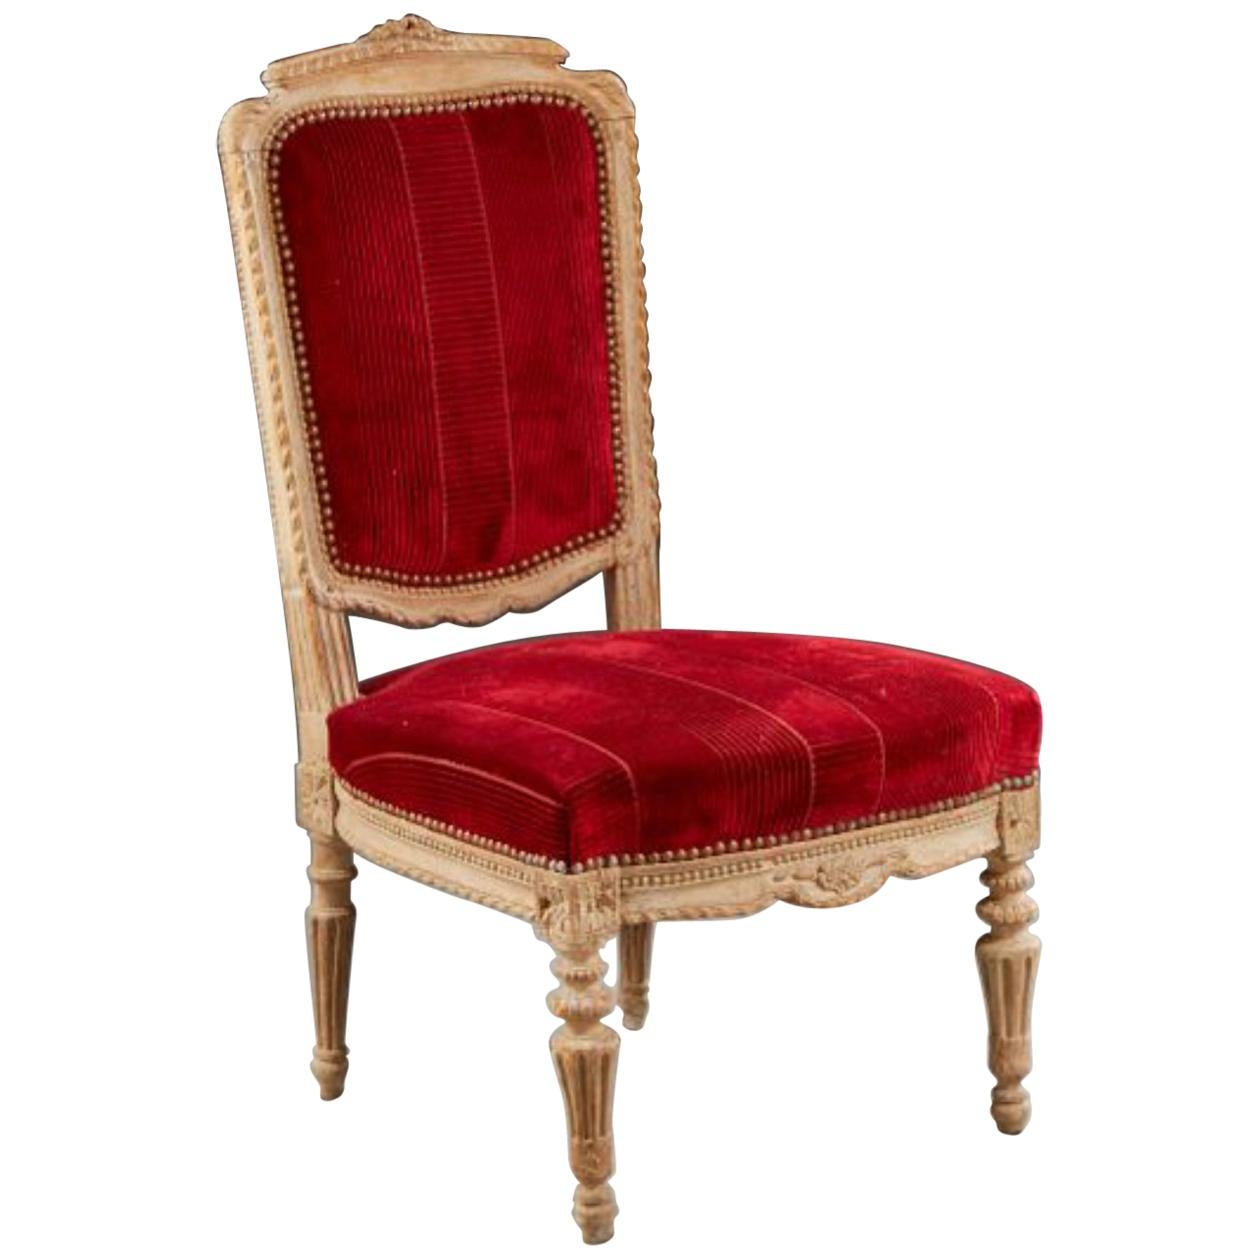 19th Century French Hand Carved Wooden Chair in Red Velvet For Sale